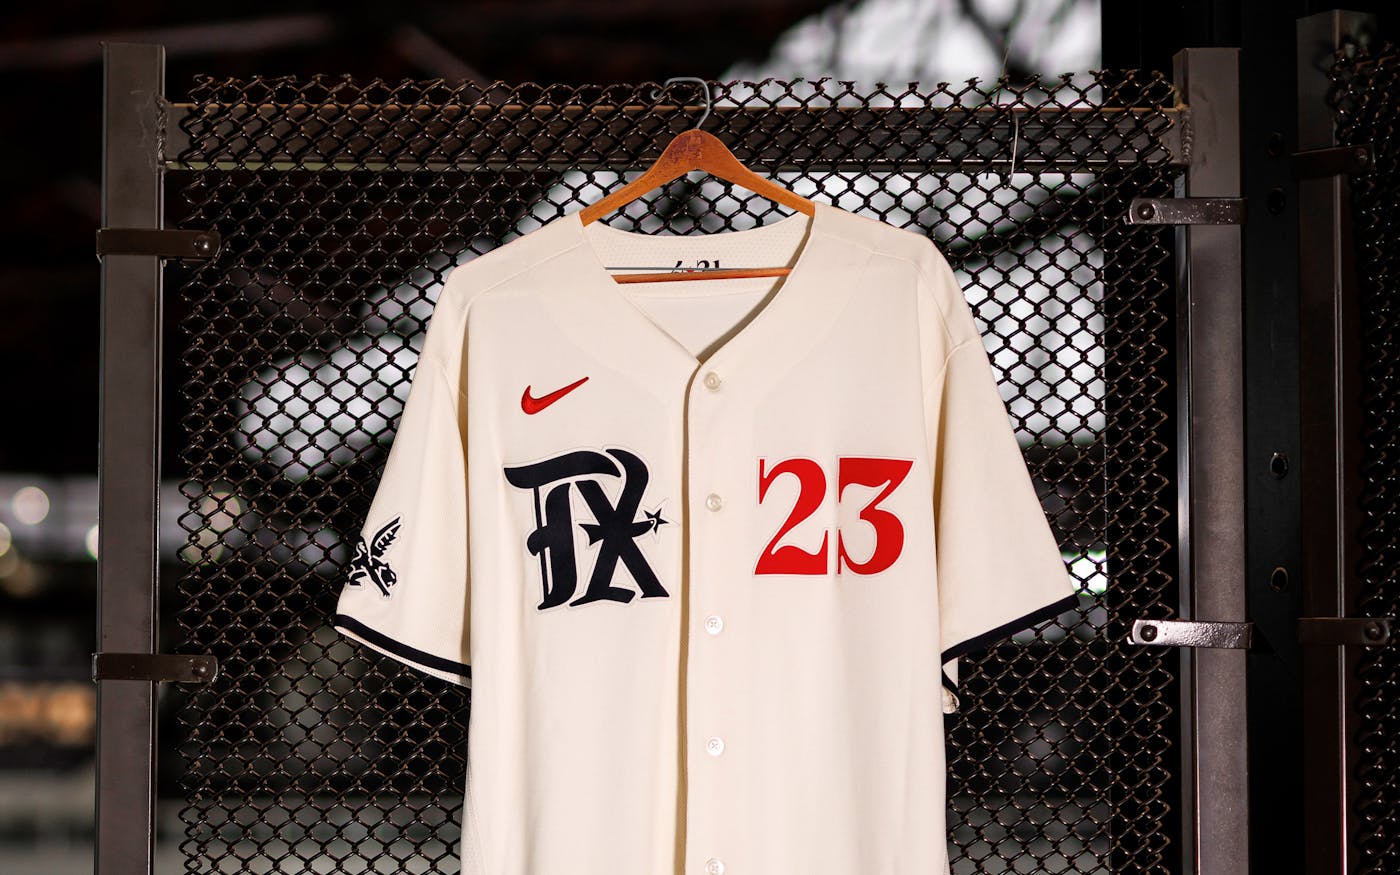 Texas Rangers City Connect Uniforms Don't Connect With Many Sports